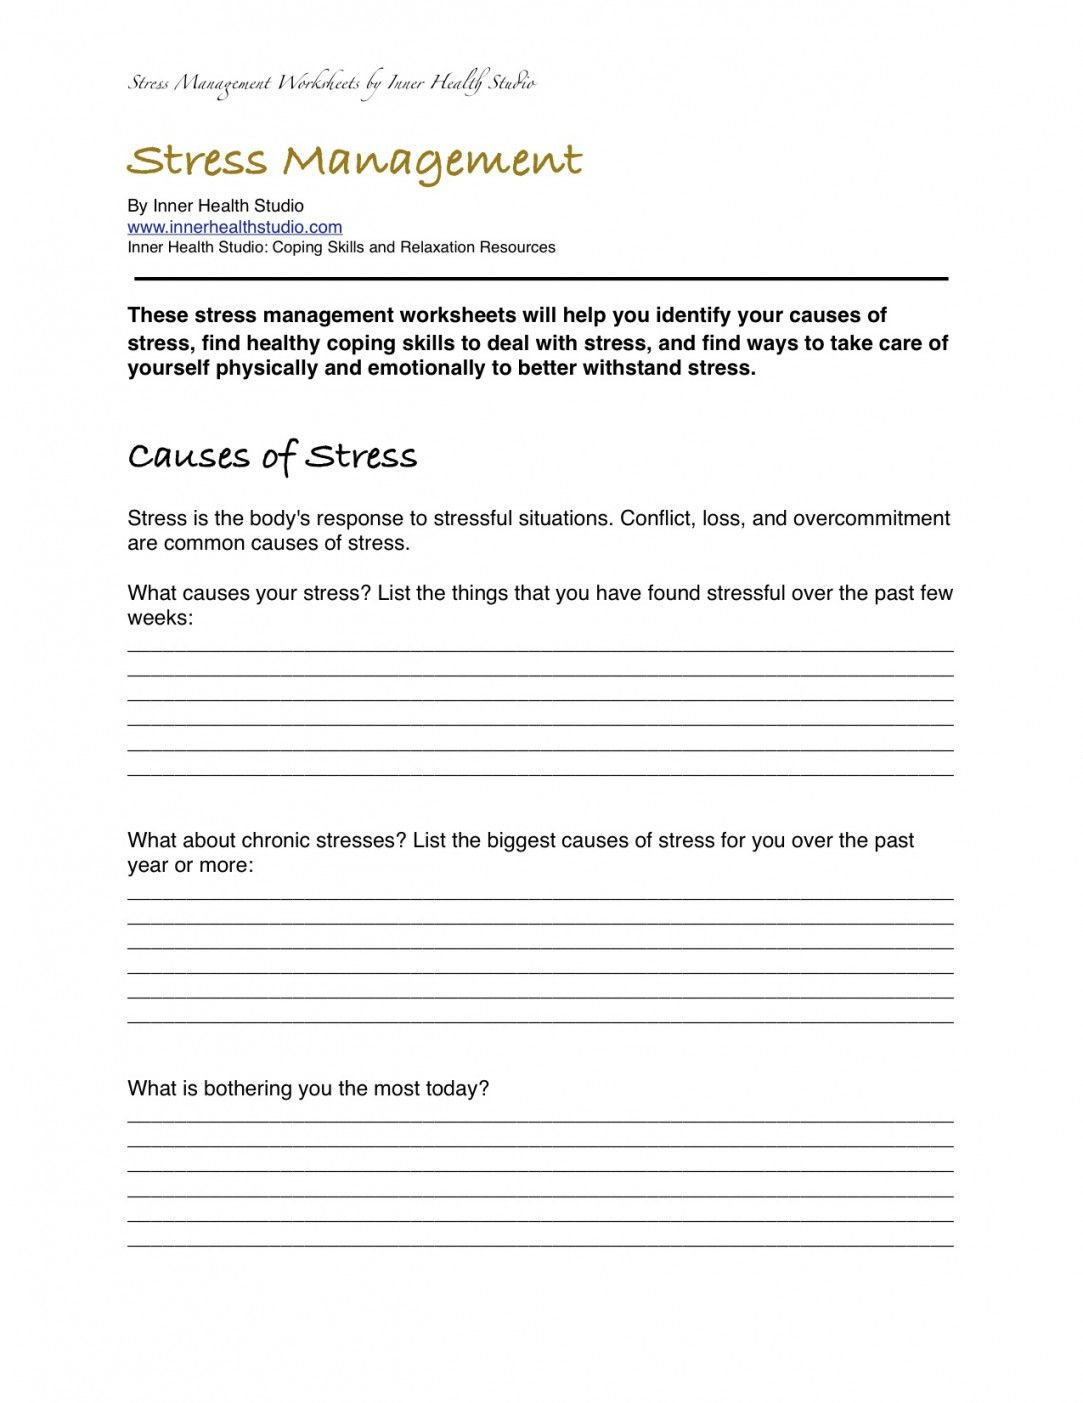 Stress Management Worksheets Lesson High School For Middle Groups Intended For Stress Worksheets For Middle School